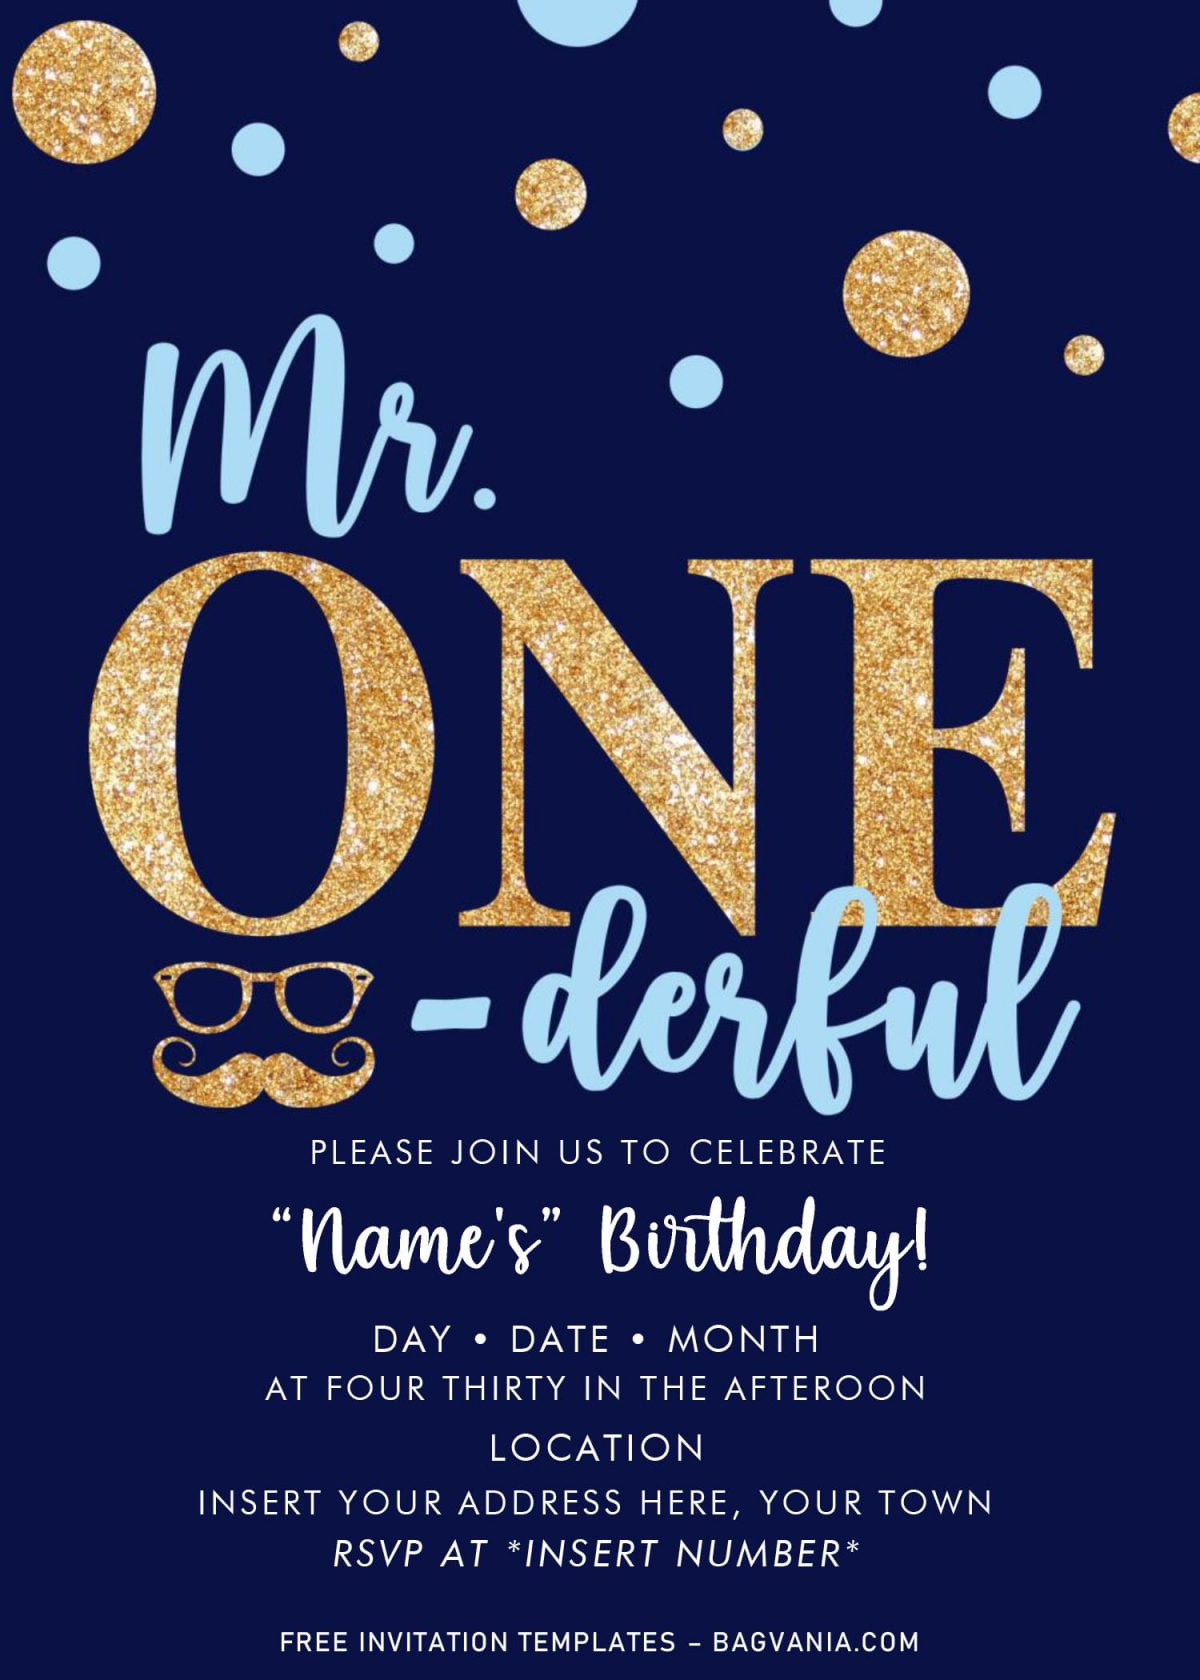 Free Mr. Onederful Birthday Party Invitation Templates For Word and has gold sunglasses and mustache